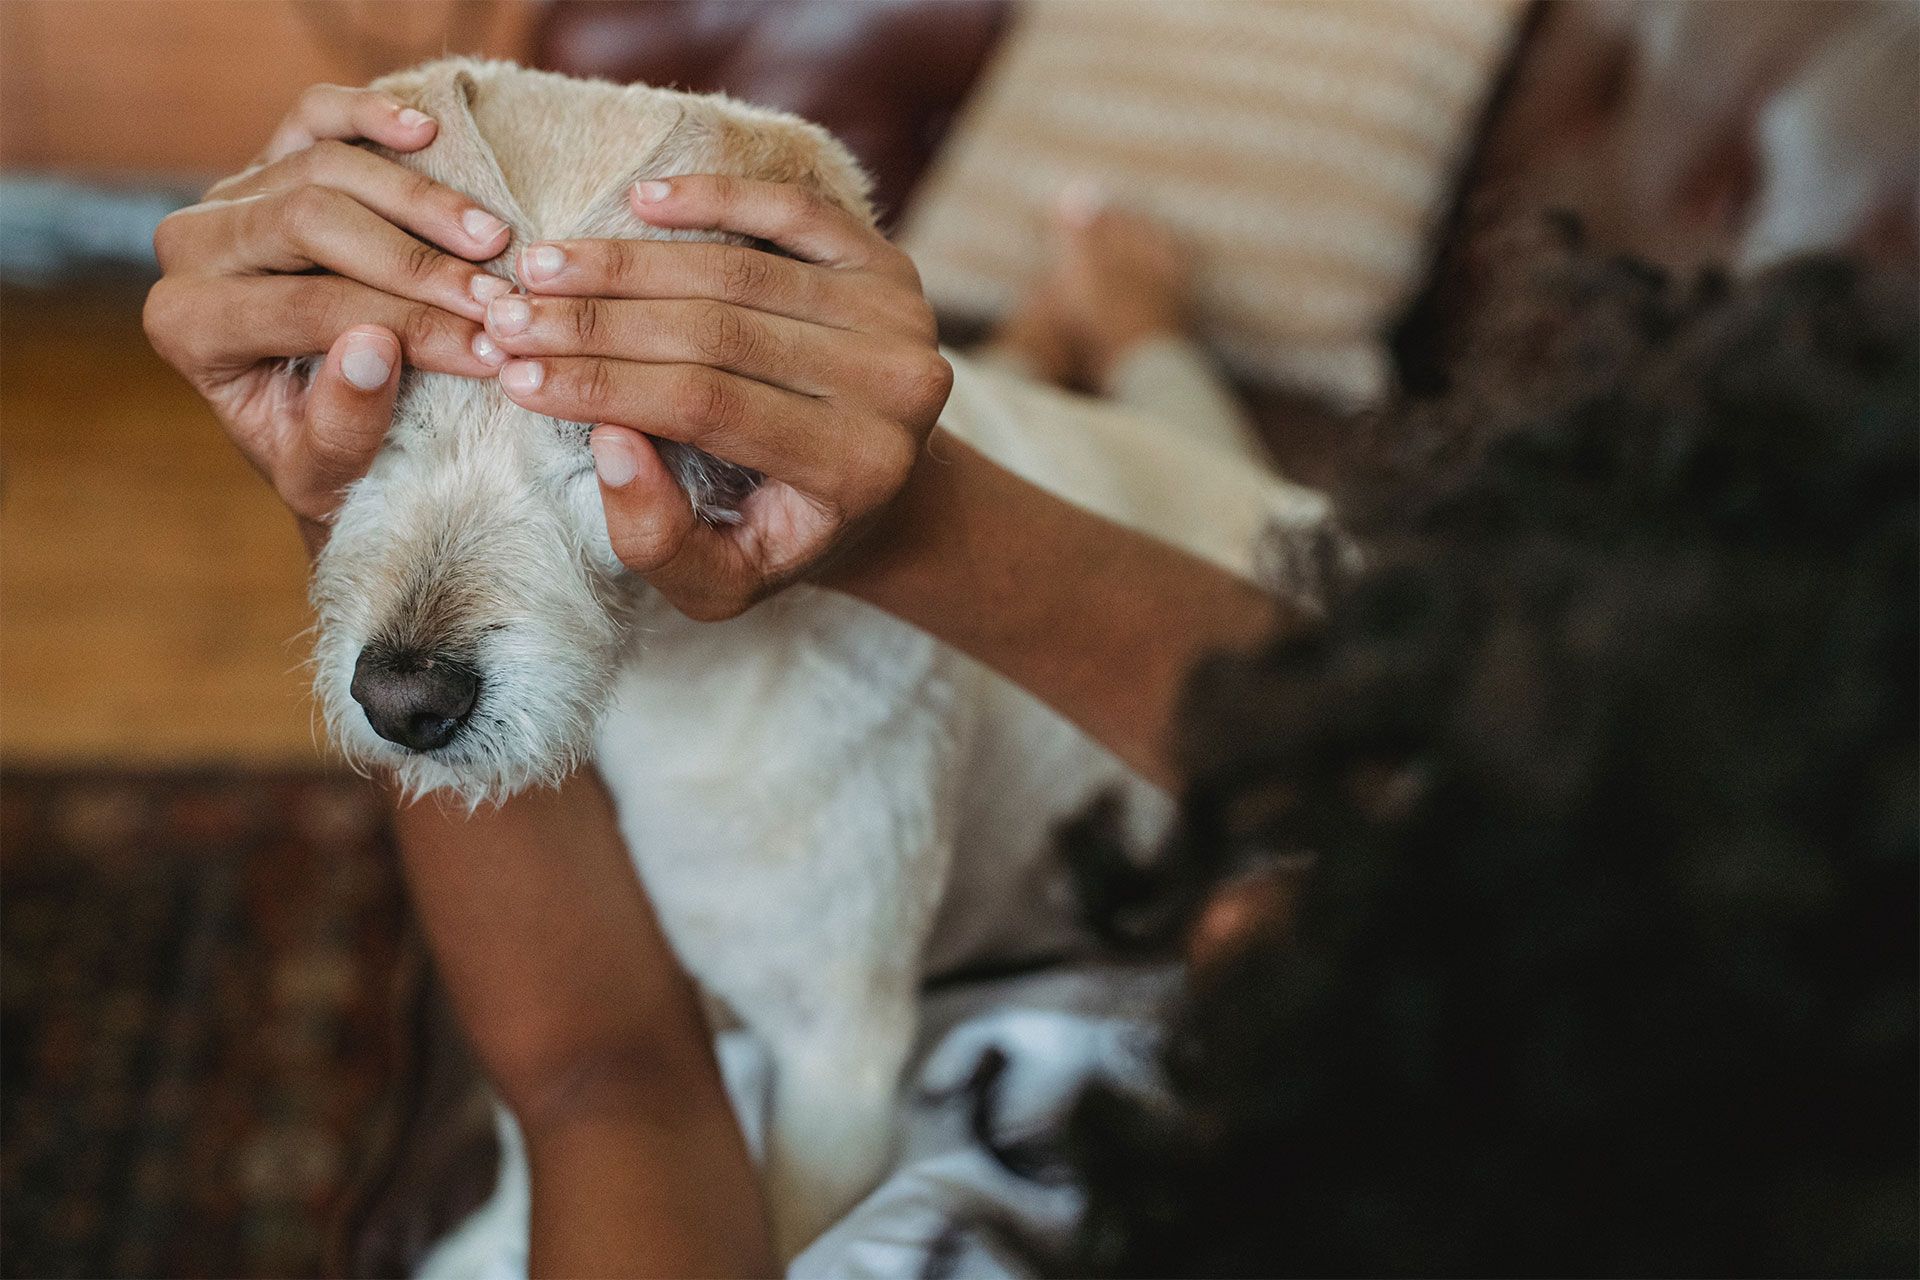 21 Simple Tricks to Make Your Dog Happier, Smarter, and Less Bored Every  Day